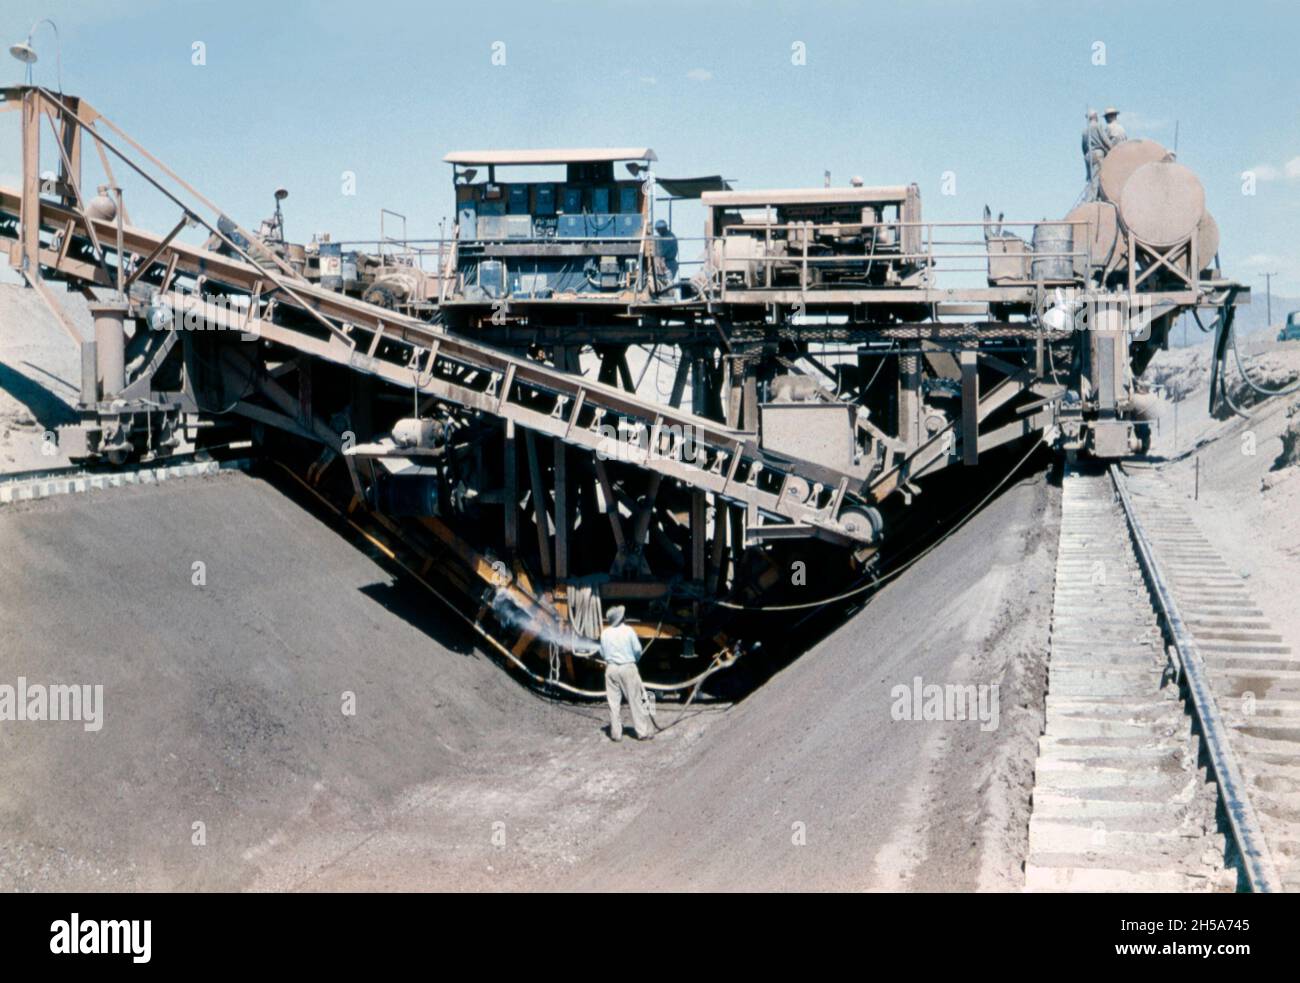 Construction work on the Wellton-Mohawk canal, near Yuma, Arizona, USA in the early 1950s. Here the workers are using the canal ‘trimmer’, a giant mechanical device on rails that digs out spoil and creates the canal’s profile. The Wellton-Mohawk Irrigation and Drainage District is located in south-west Arizona, east of Yuma, built between 1949 and 1957. It allows the irrigation in the Lower Gila valley with water from the Colorado river via the Gila Canal to the Wellton-Mohawk Canal, where it is pumped around 160 feet to the headwaters – a vintage 1950s photograph. Stock Photo